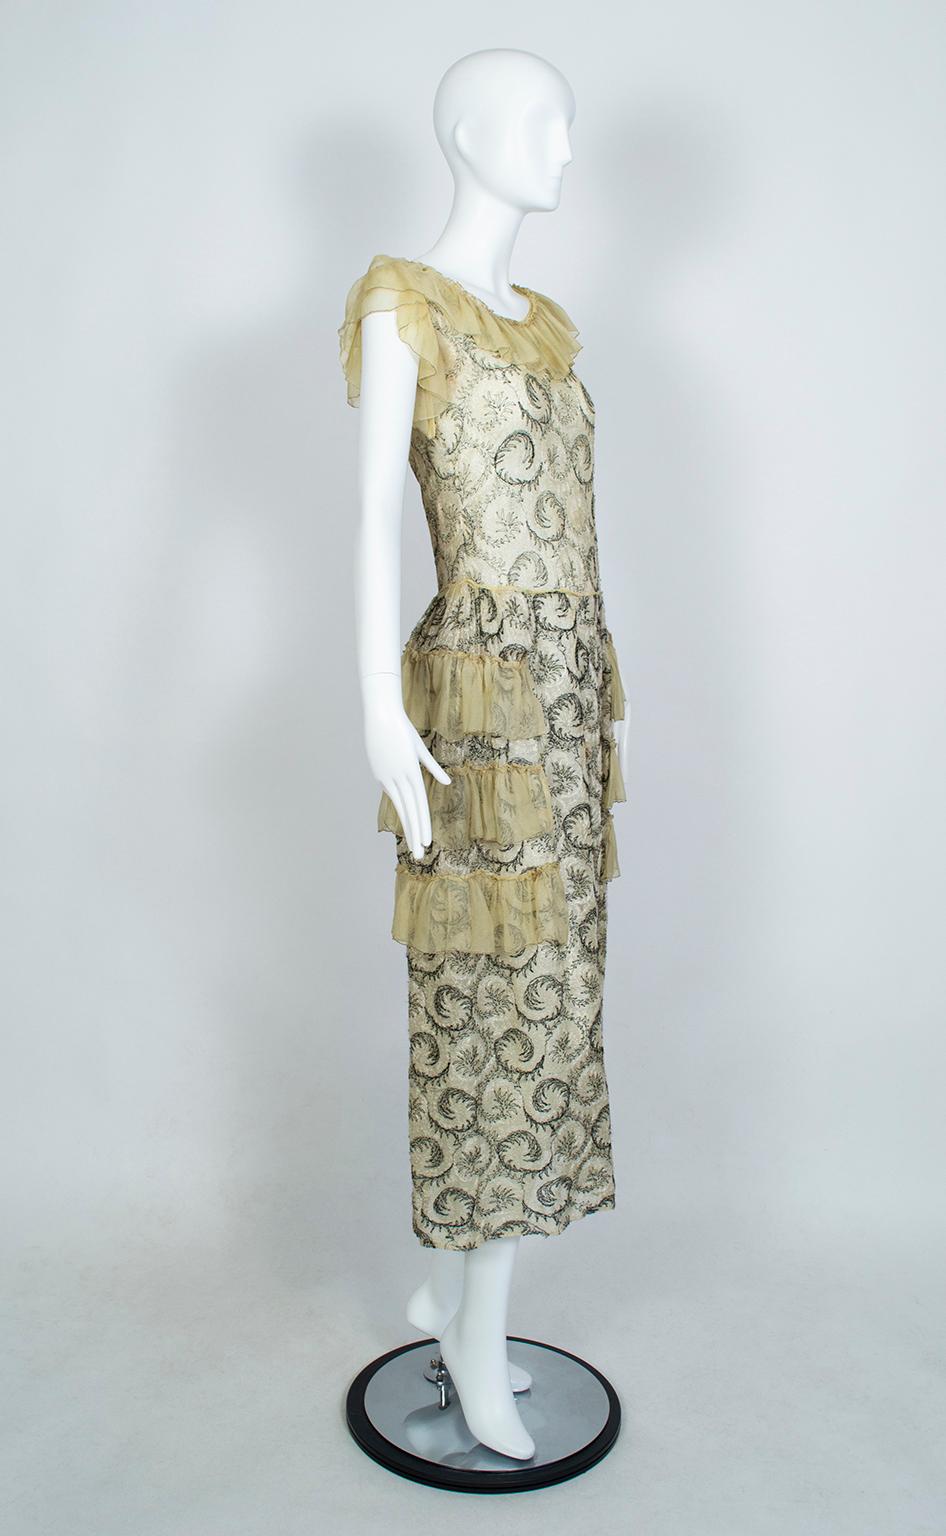 With snug bodices and wired hip panniers, Robes de Style struck a happy medium between the highly-ornamented gowns of the Victorian era and the slinkier drop-waist dresses of the Jazz Age. This one incorporates scrolling 2-tone silk embroidery to